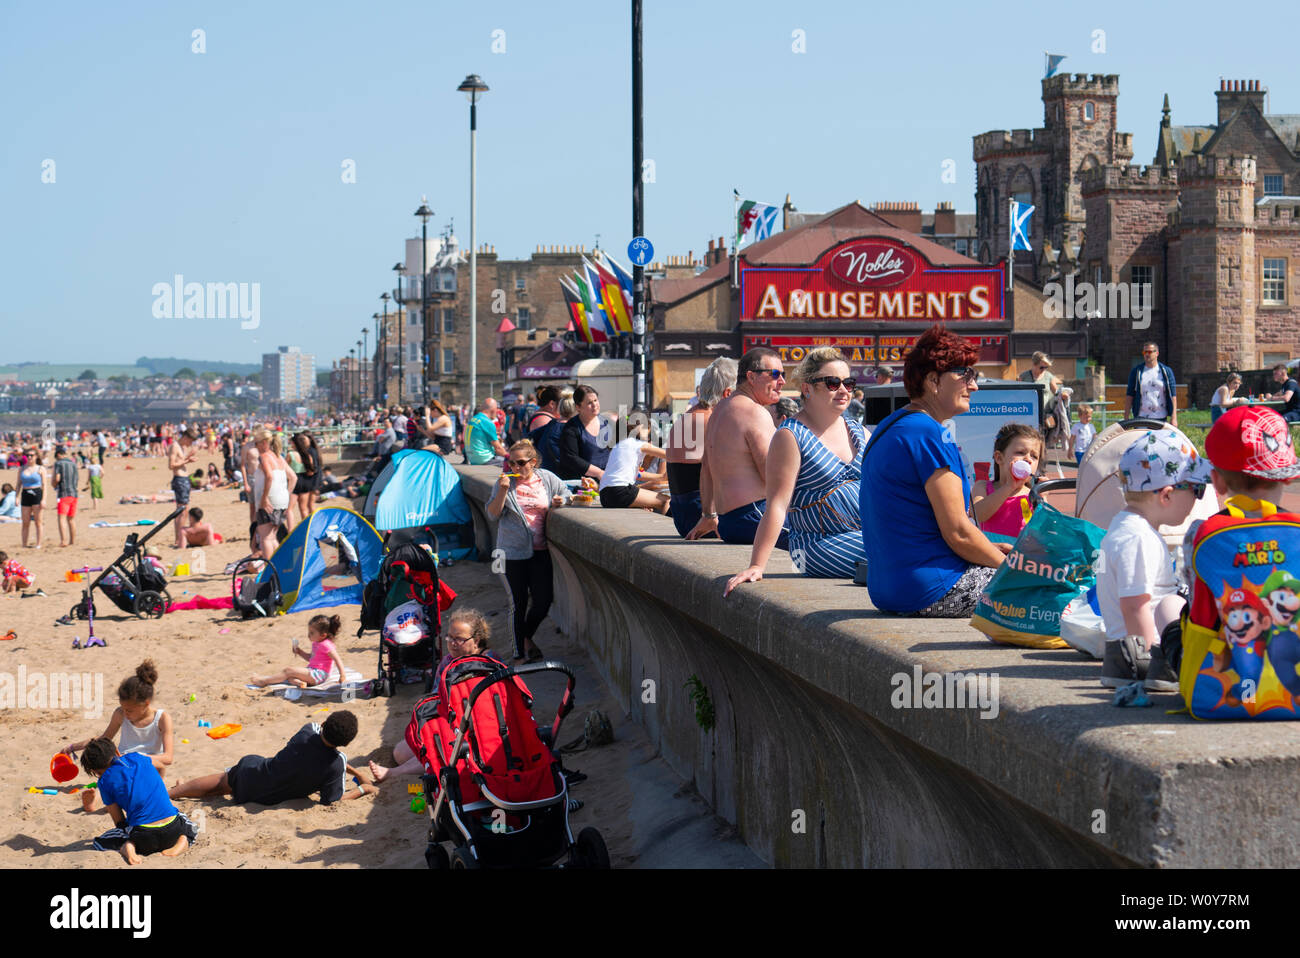 Portobello, Scotland, UK. 28th June, 2019. Warm temperatures and unbroken sunshine brought hundreds of people and families to enjoy this famous beach outside Edinburgh. Promenade at Portobello is busy with families . Credit: Iain Masterton/Alamy Live News Stock Photo